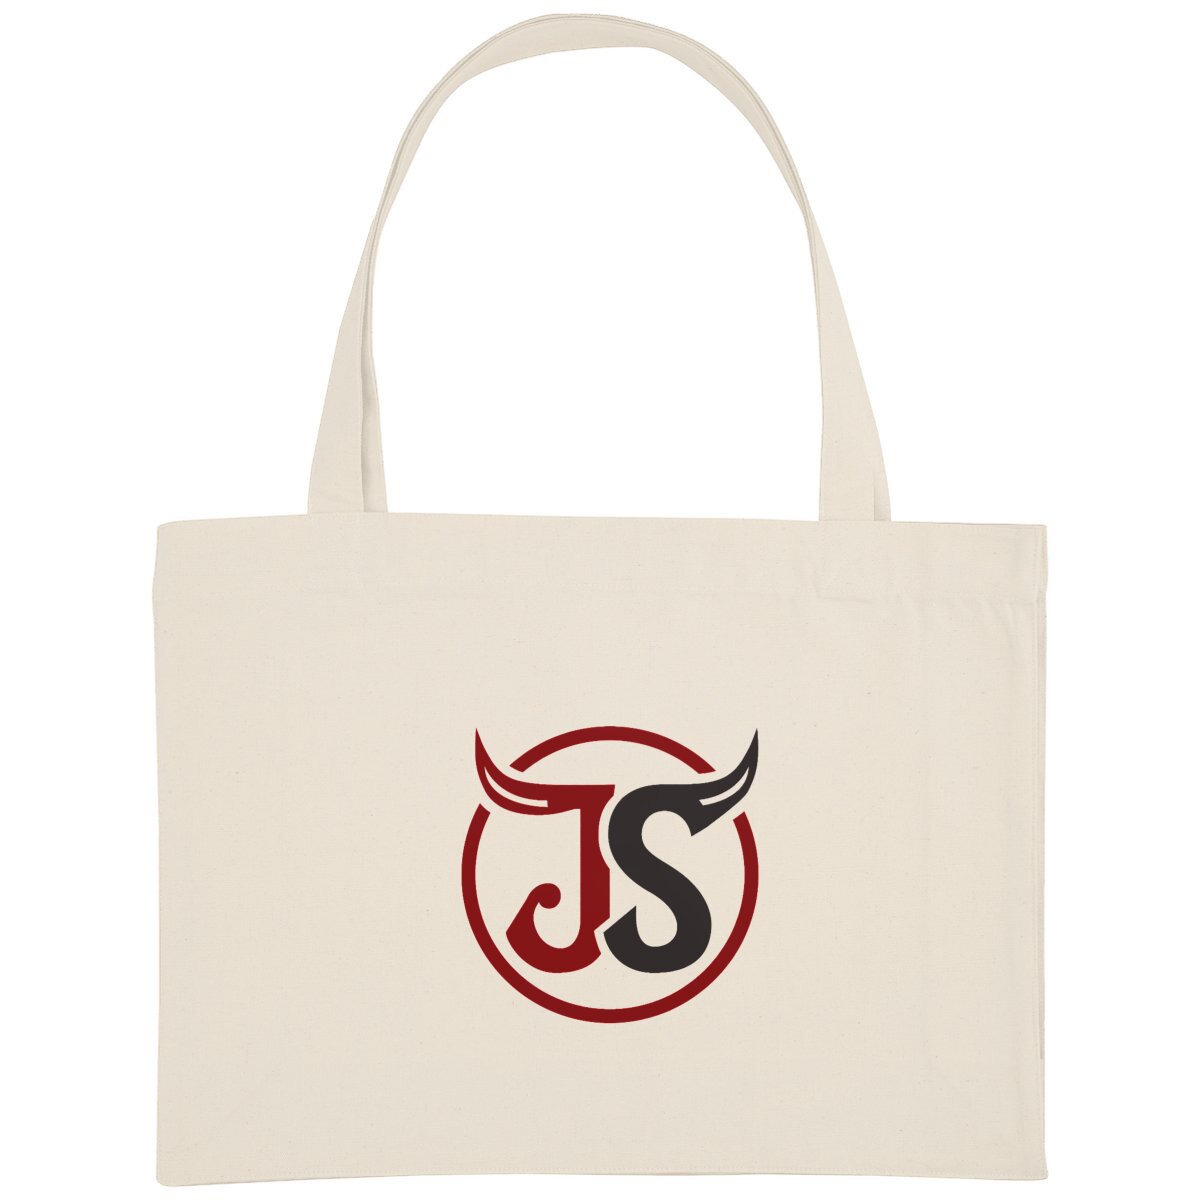 JS Recycled Material Shopping Bag